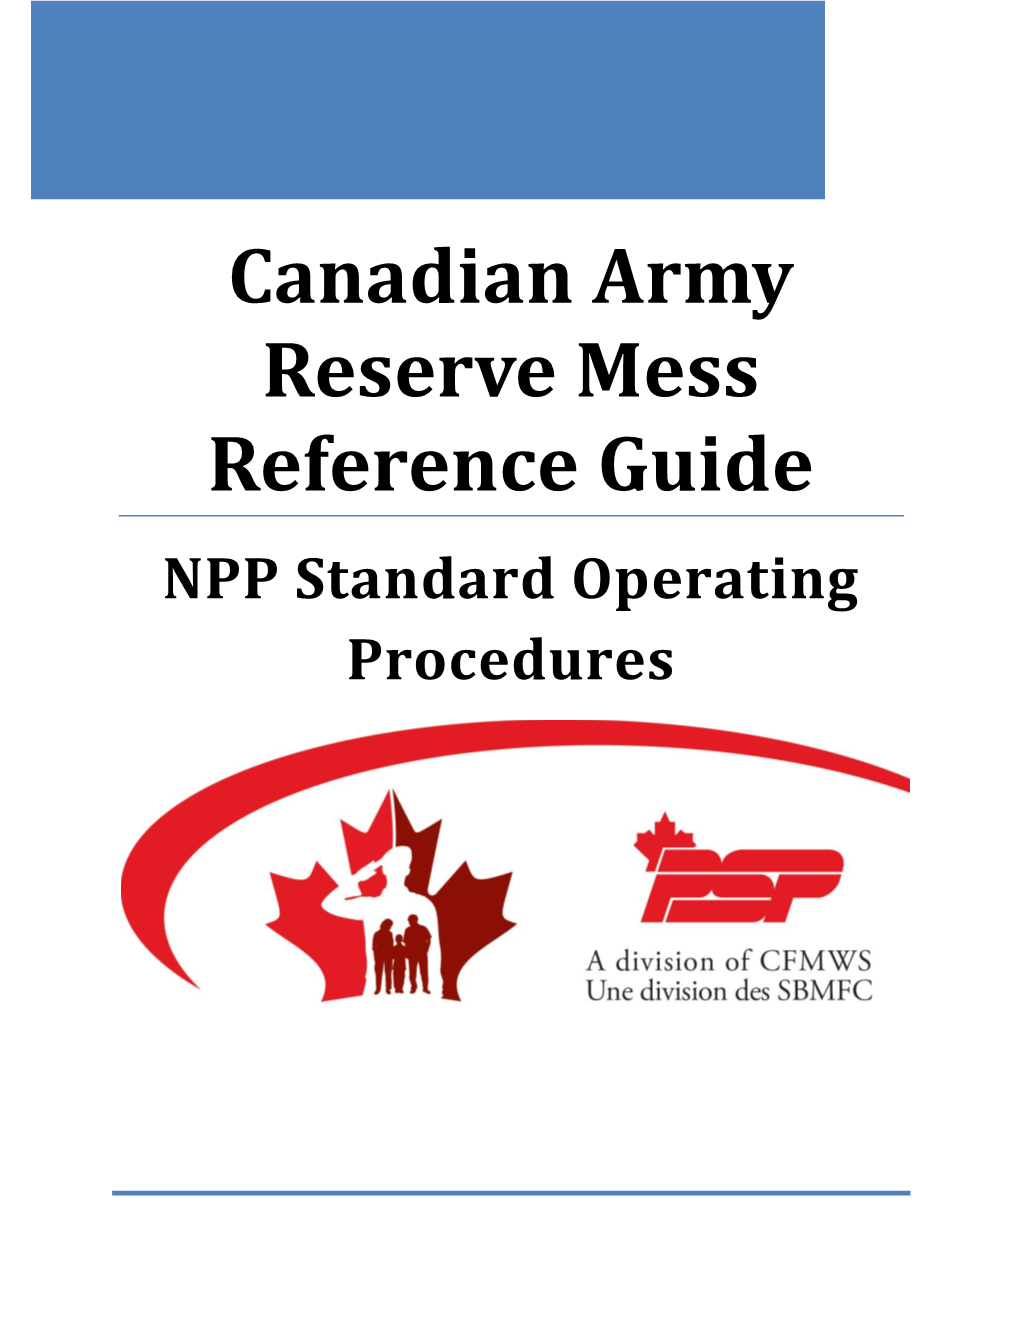 Canadian Army Reserve Mess Reference Guide